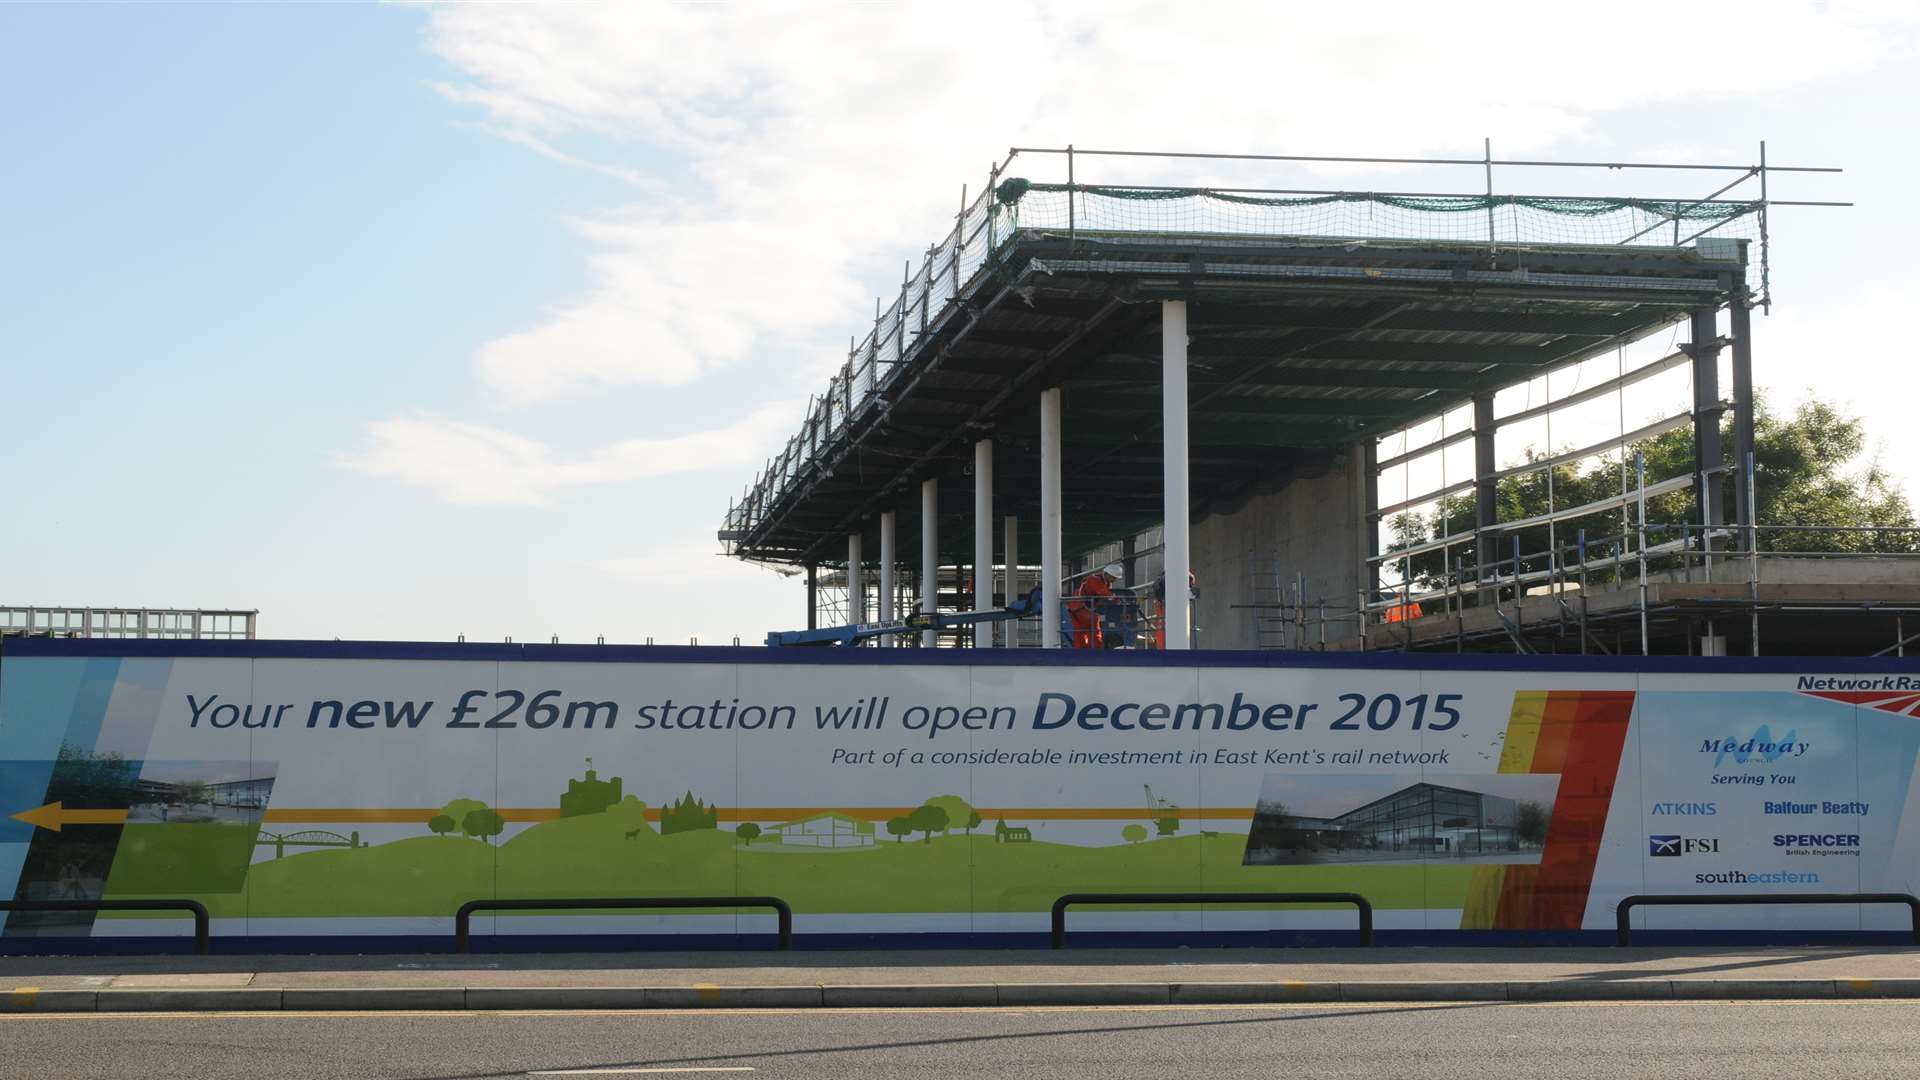 Rochester’s new station in Corporation Street opens in December 13